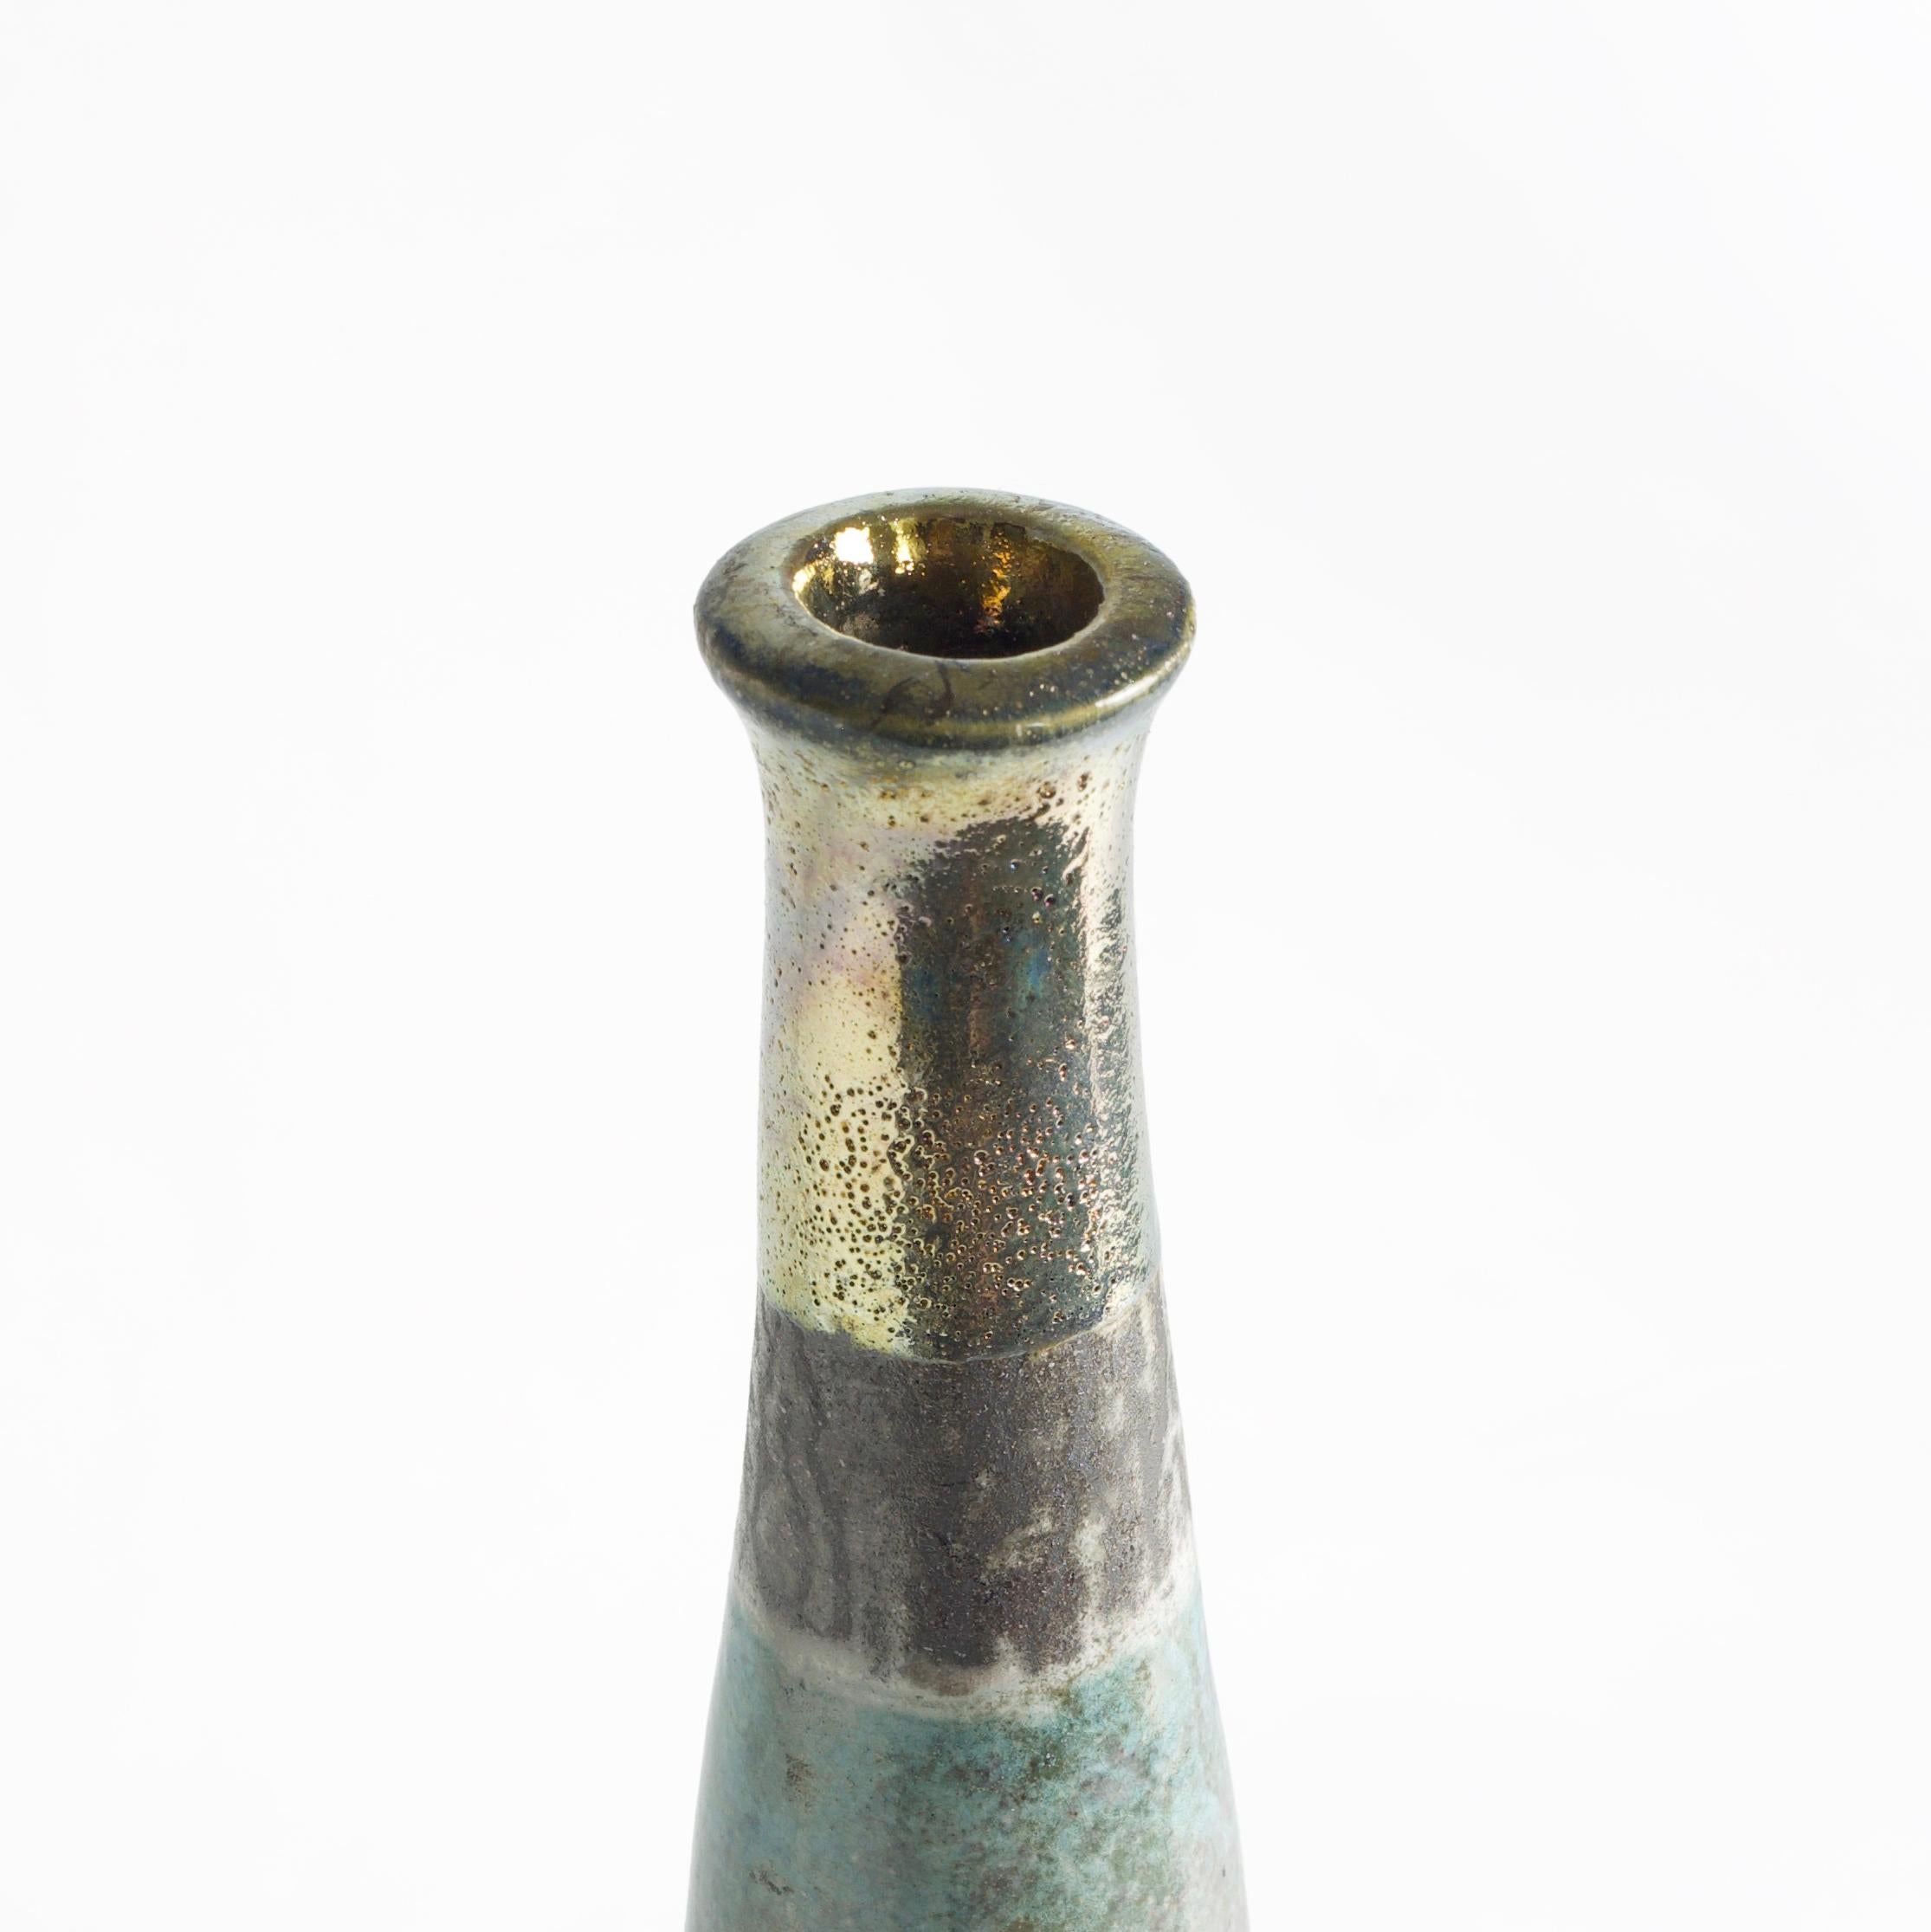 Japanese Modern Stelo Candle Holder Raku Ceramic Copper Gold In New Condition For Sale In monza, Monza and Brianza